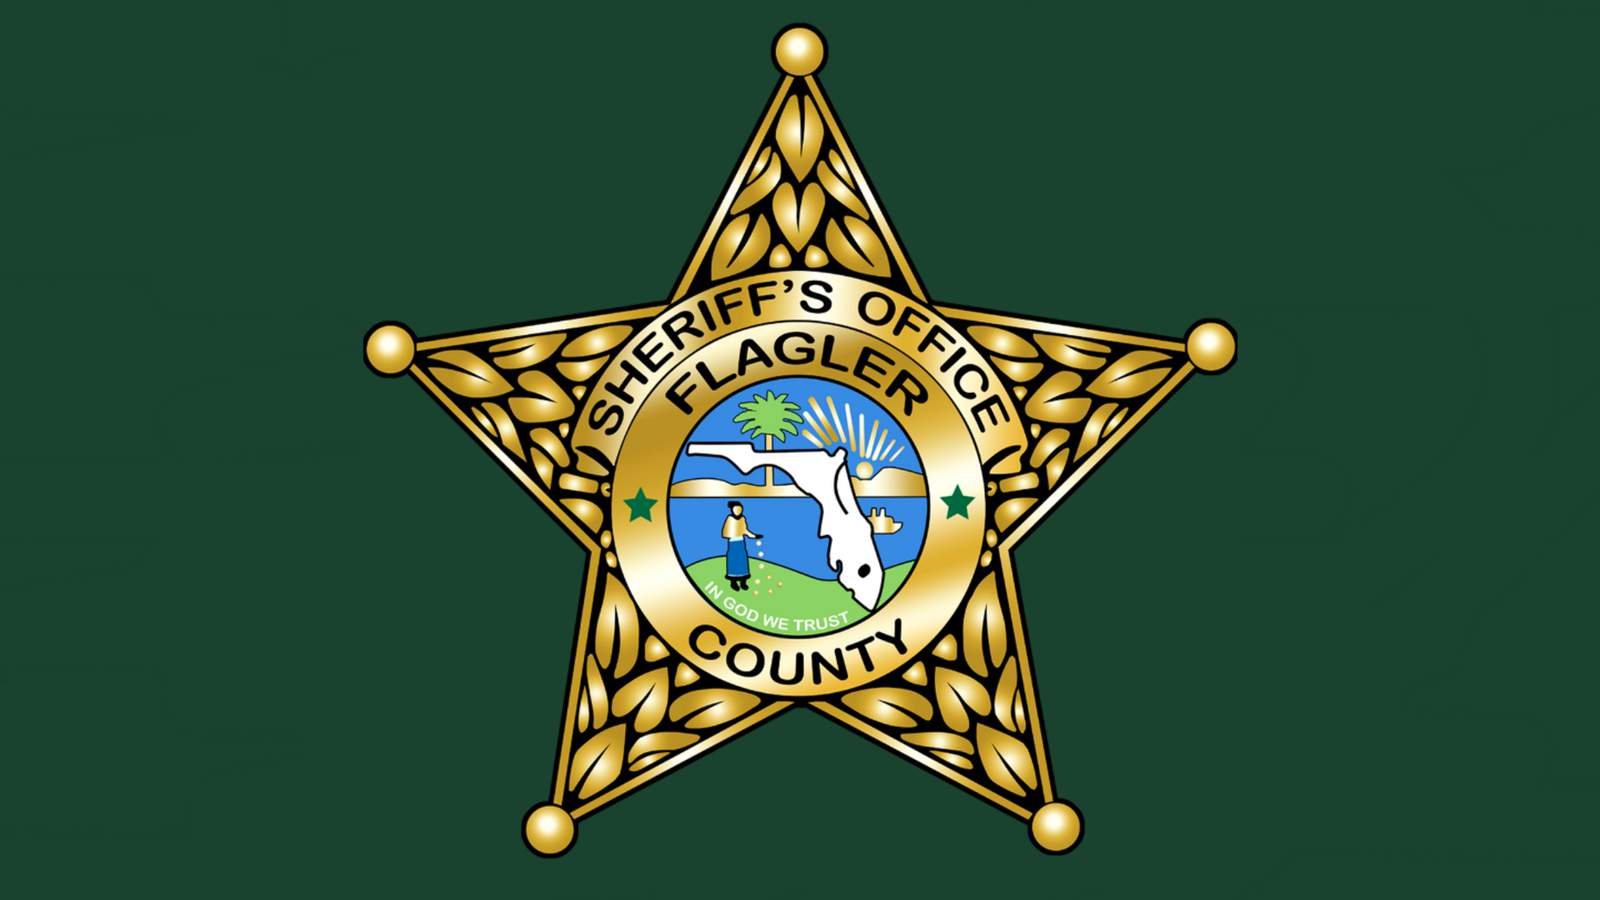 Here’s a glimpse of the Flagler County Sheriff’s Office use of force policy